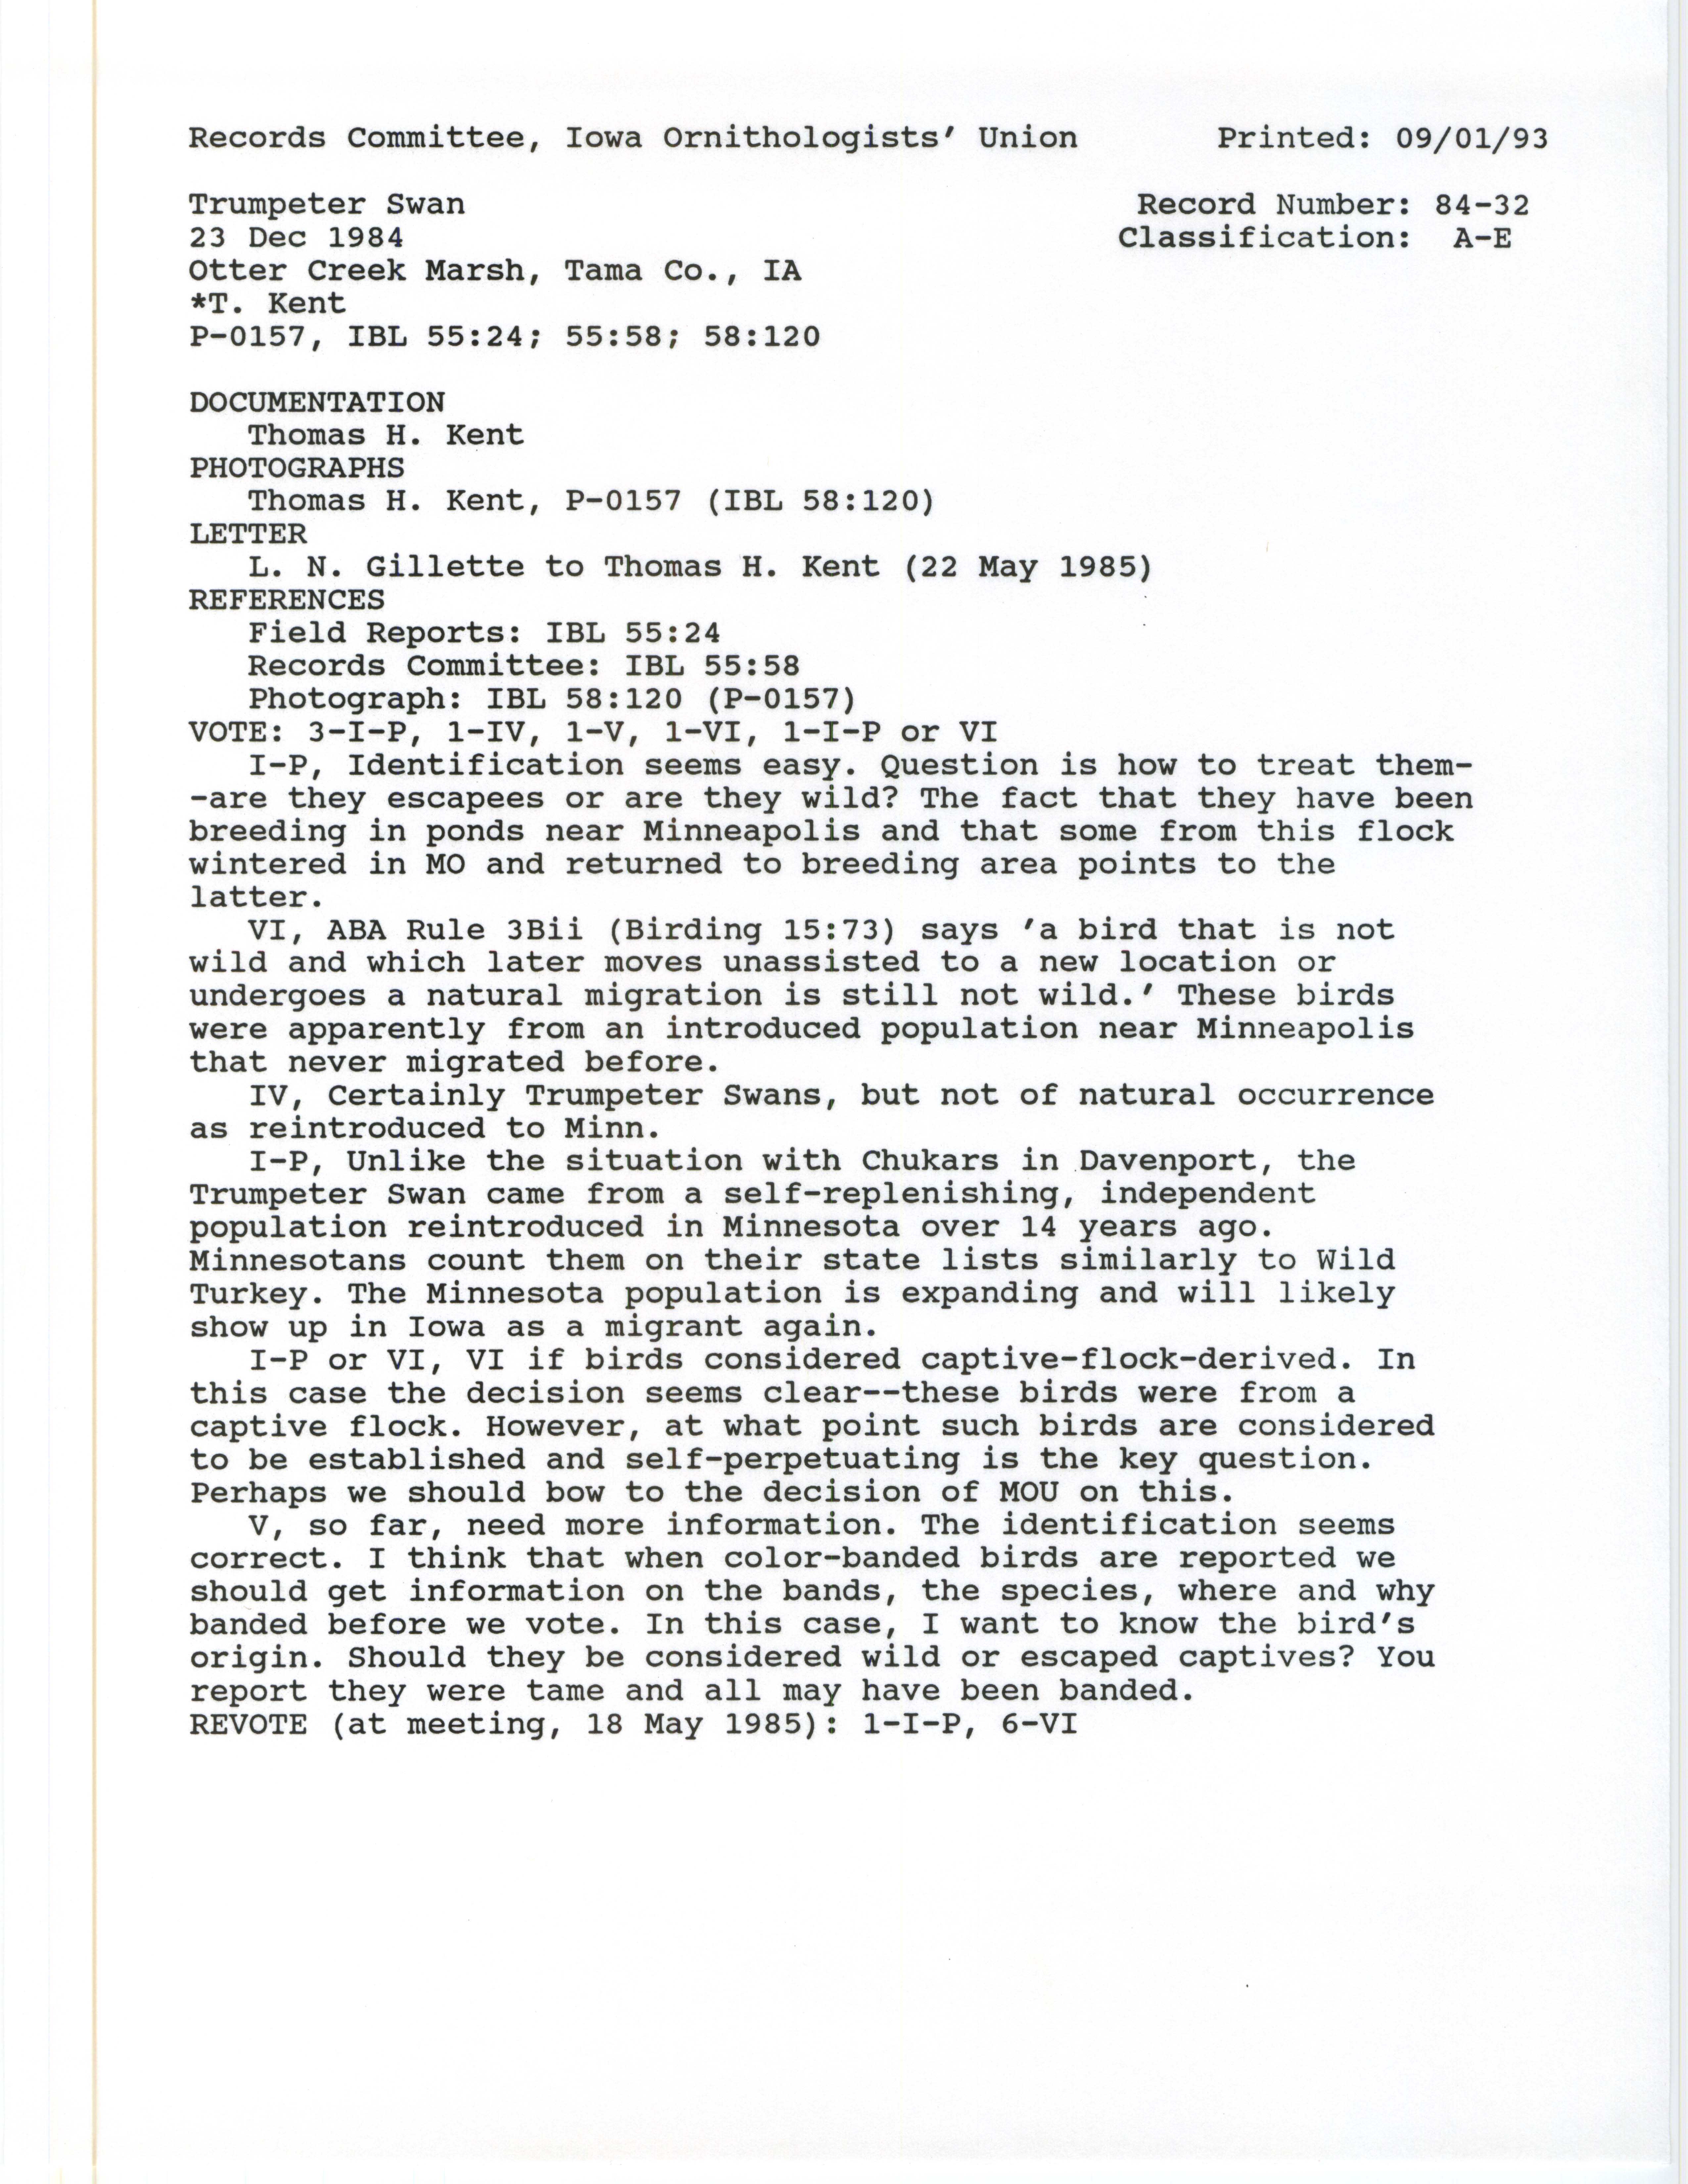 Records Committee review for rare bird sighting of Trumpeter Swan at Otter Creek Marsh, 1984